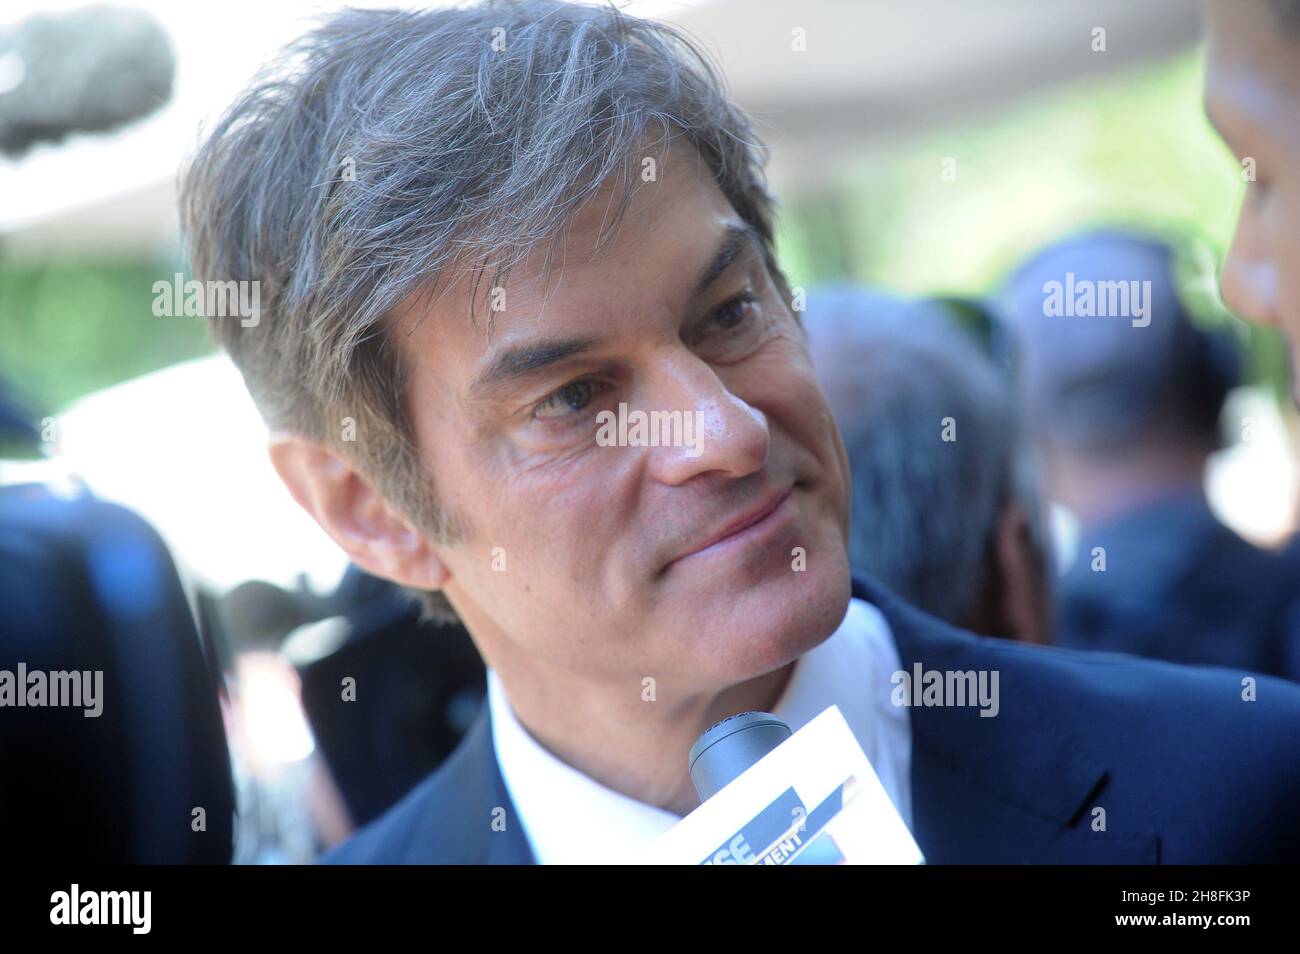 Manhattan, United States Of America. 31st Dec, 2008. NEW YORK, NY - SEPTEMBER 07: Dr. Oz attend the Joan Rivers memorial service at Temple Emanu-El on September 7, 2014 in New York City. People: Dr. Oz Credit: Storms Media Group/Alamy Live News Stock Photo